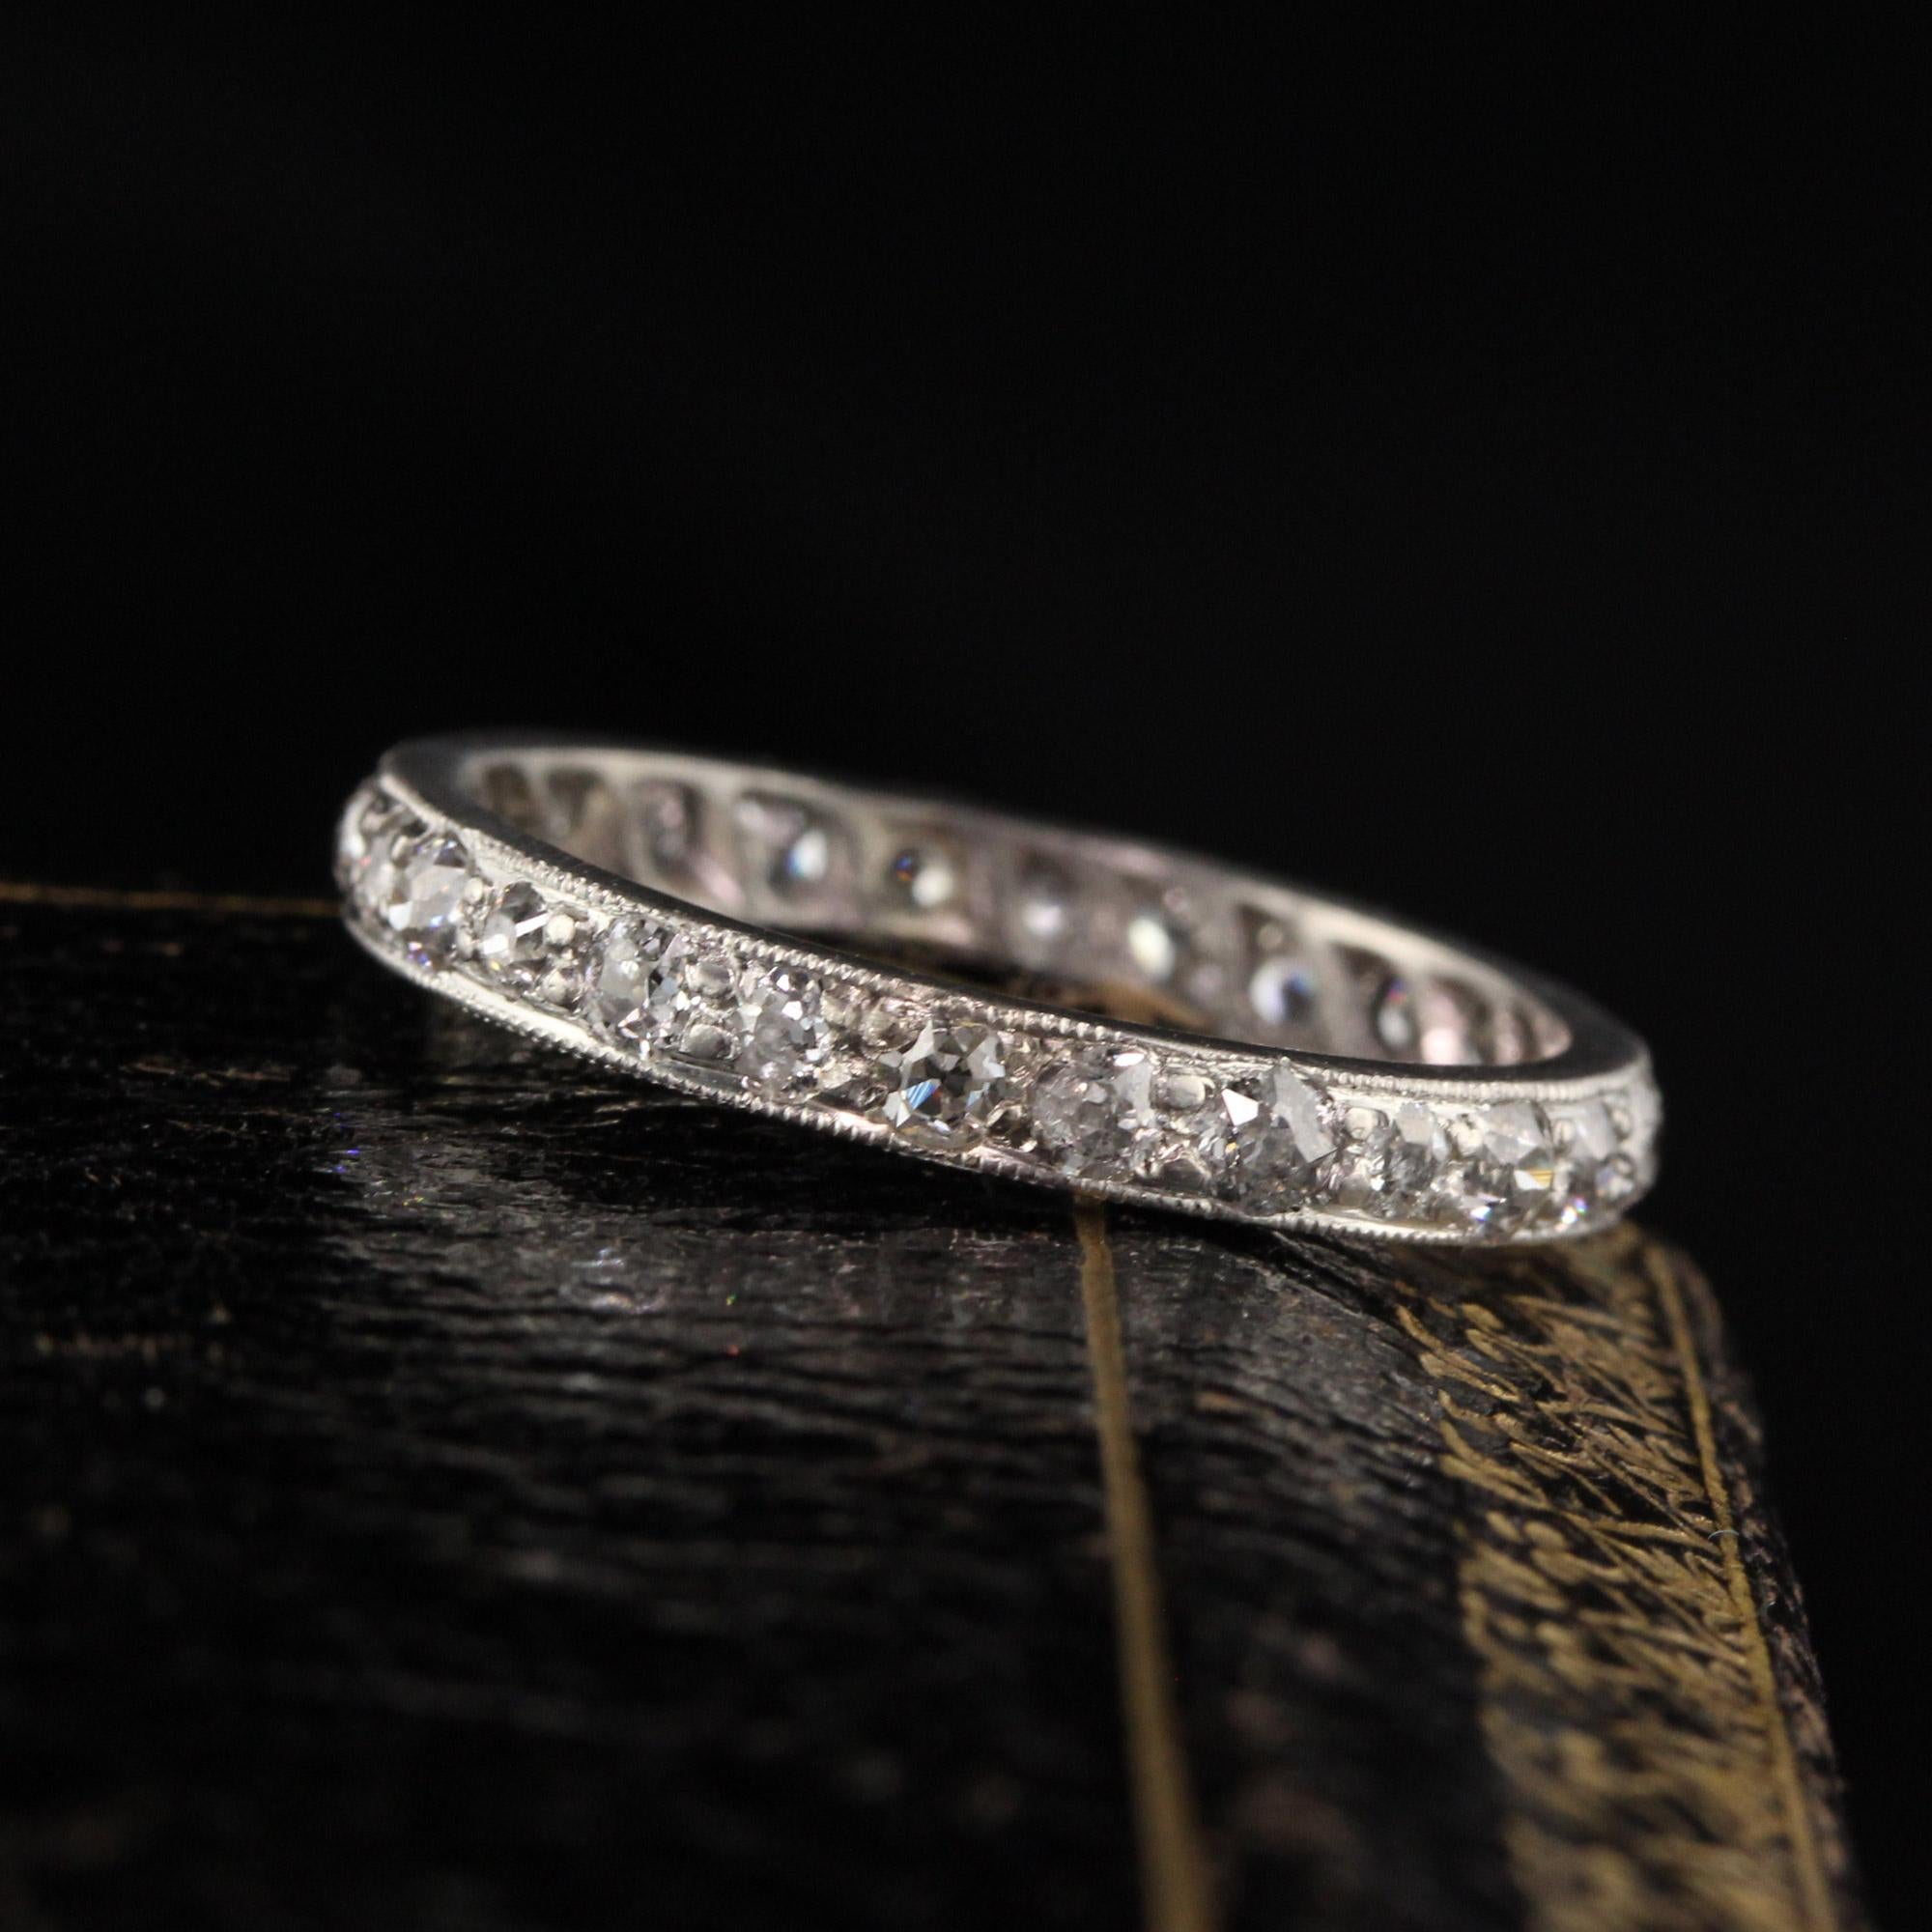 Stunning antique eternity band with old mine cut diamonds. 

Item #R0571

Metal: Platinum

Weight: 2.3 Grams

Total Diamond Weight: Approximately 0.80 cts

Diamond Color: H

Diamond Clarity: VS2

Ring Size: 6.25

*Unfortunately this ring cannot be